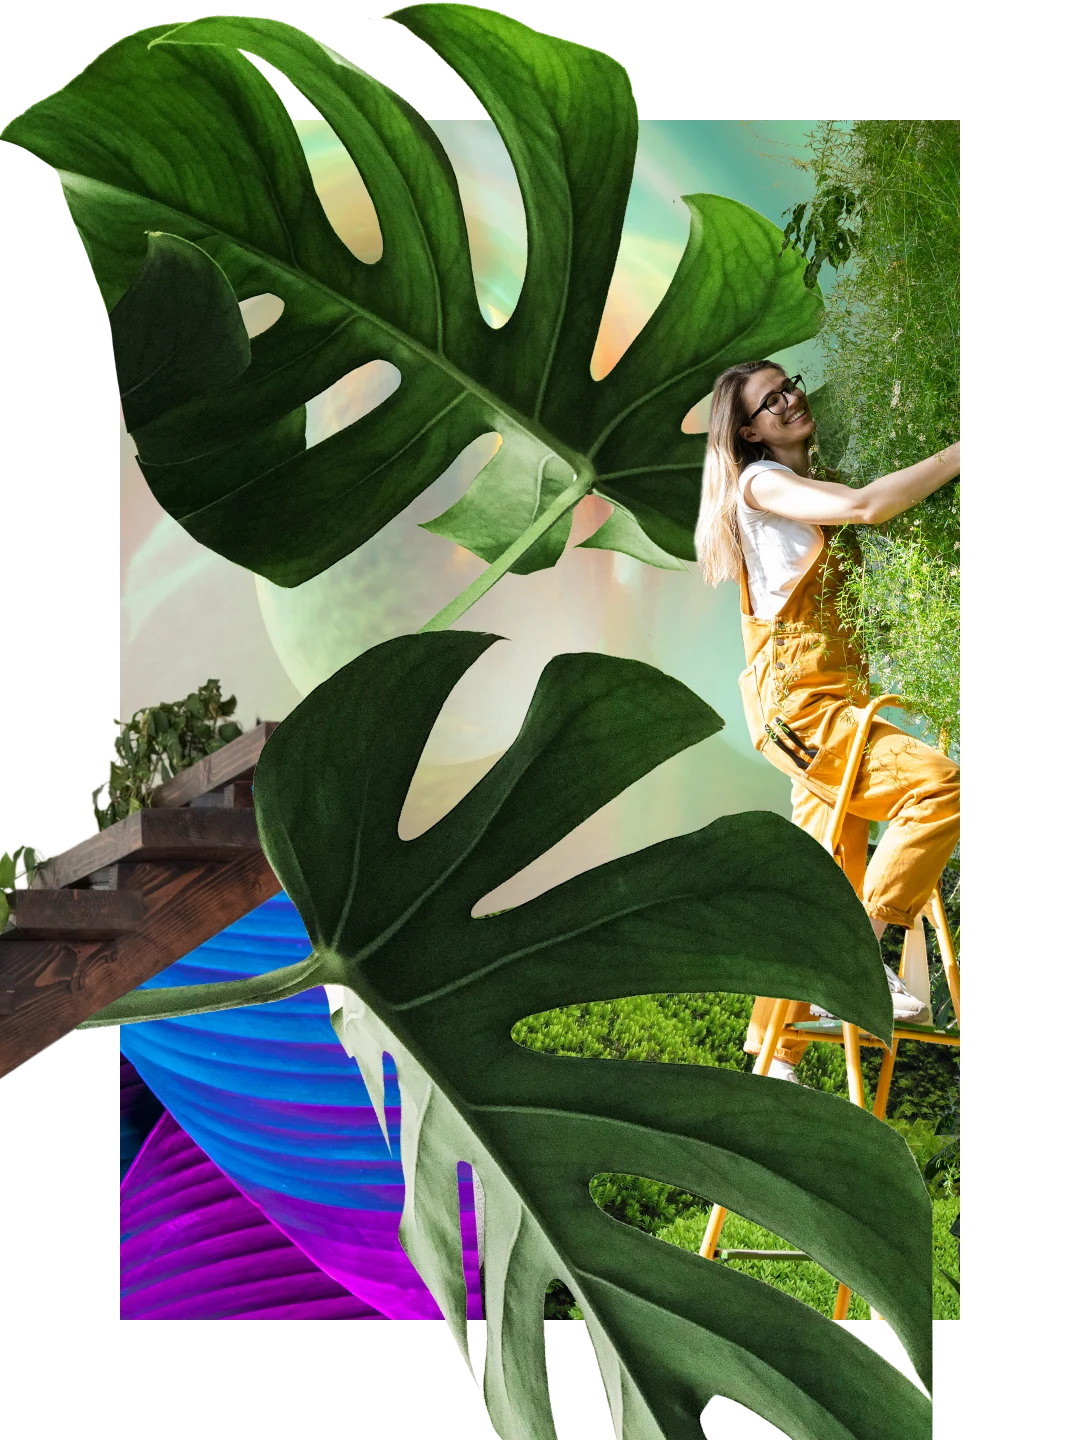 Collage of greenery. Two big monstera leaves hang down in front of a staircase with leaves on it. A white woman in yellow dungarees is on a ladder caring for a plant on the right.
